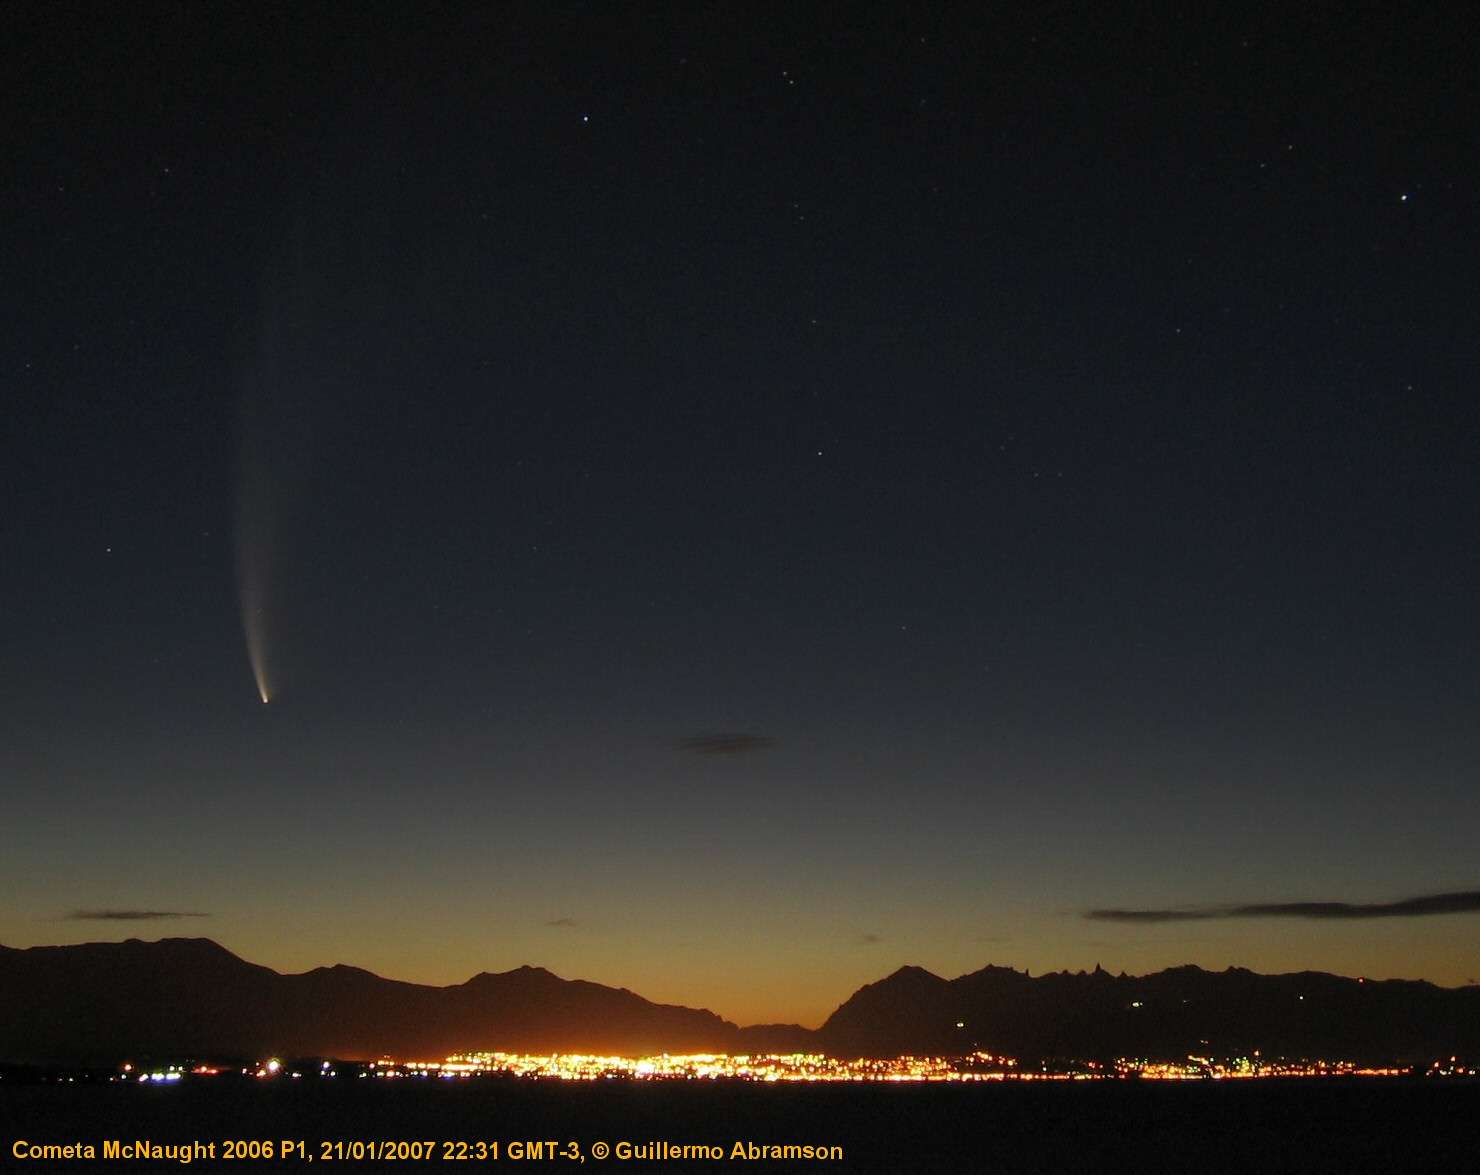 MacNaught comet photographed from Argentina: 69 KB